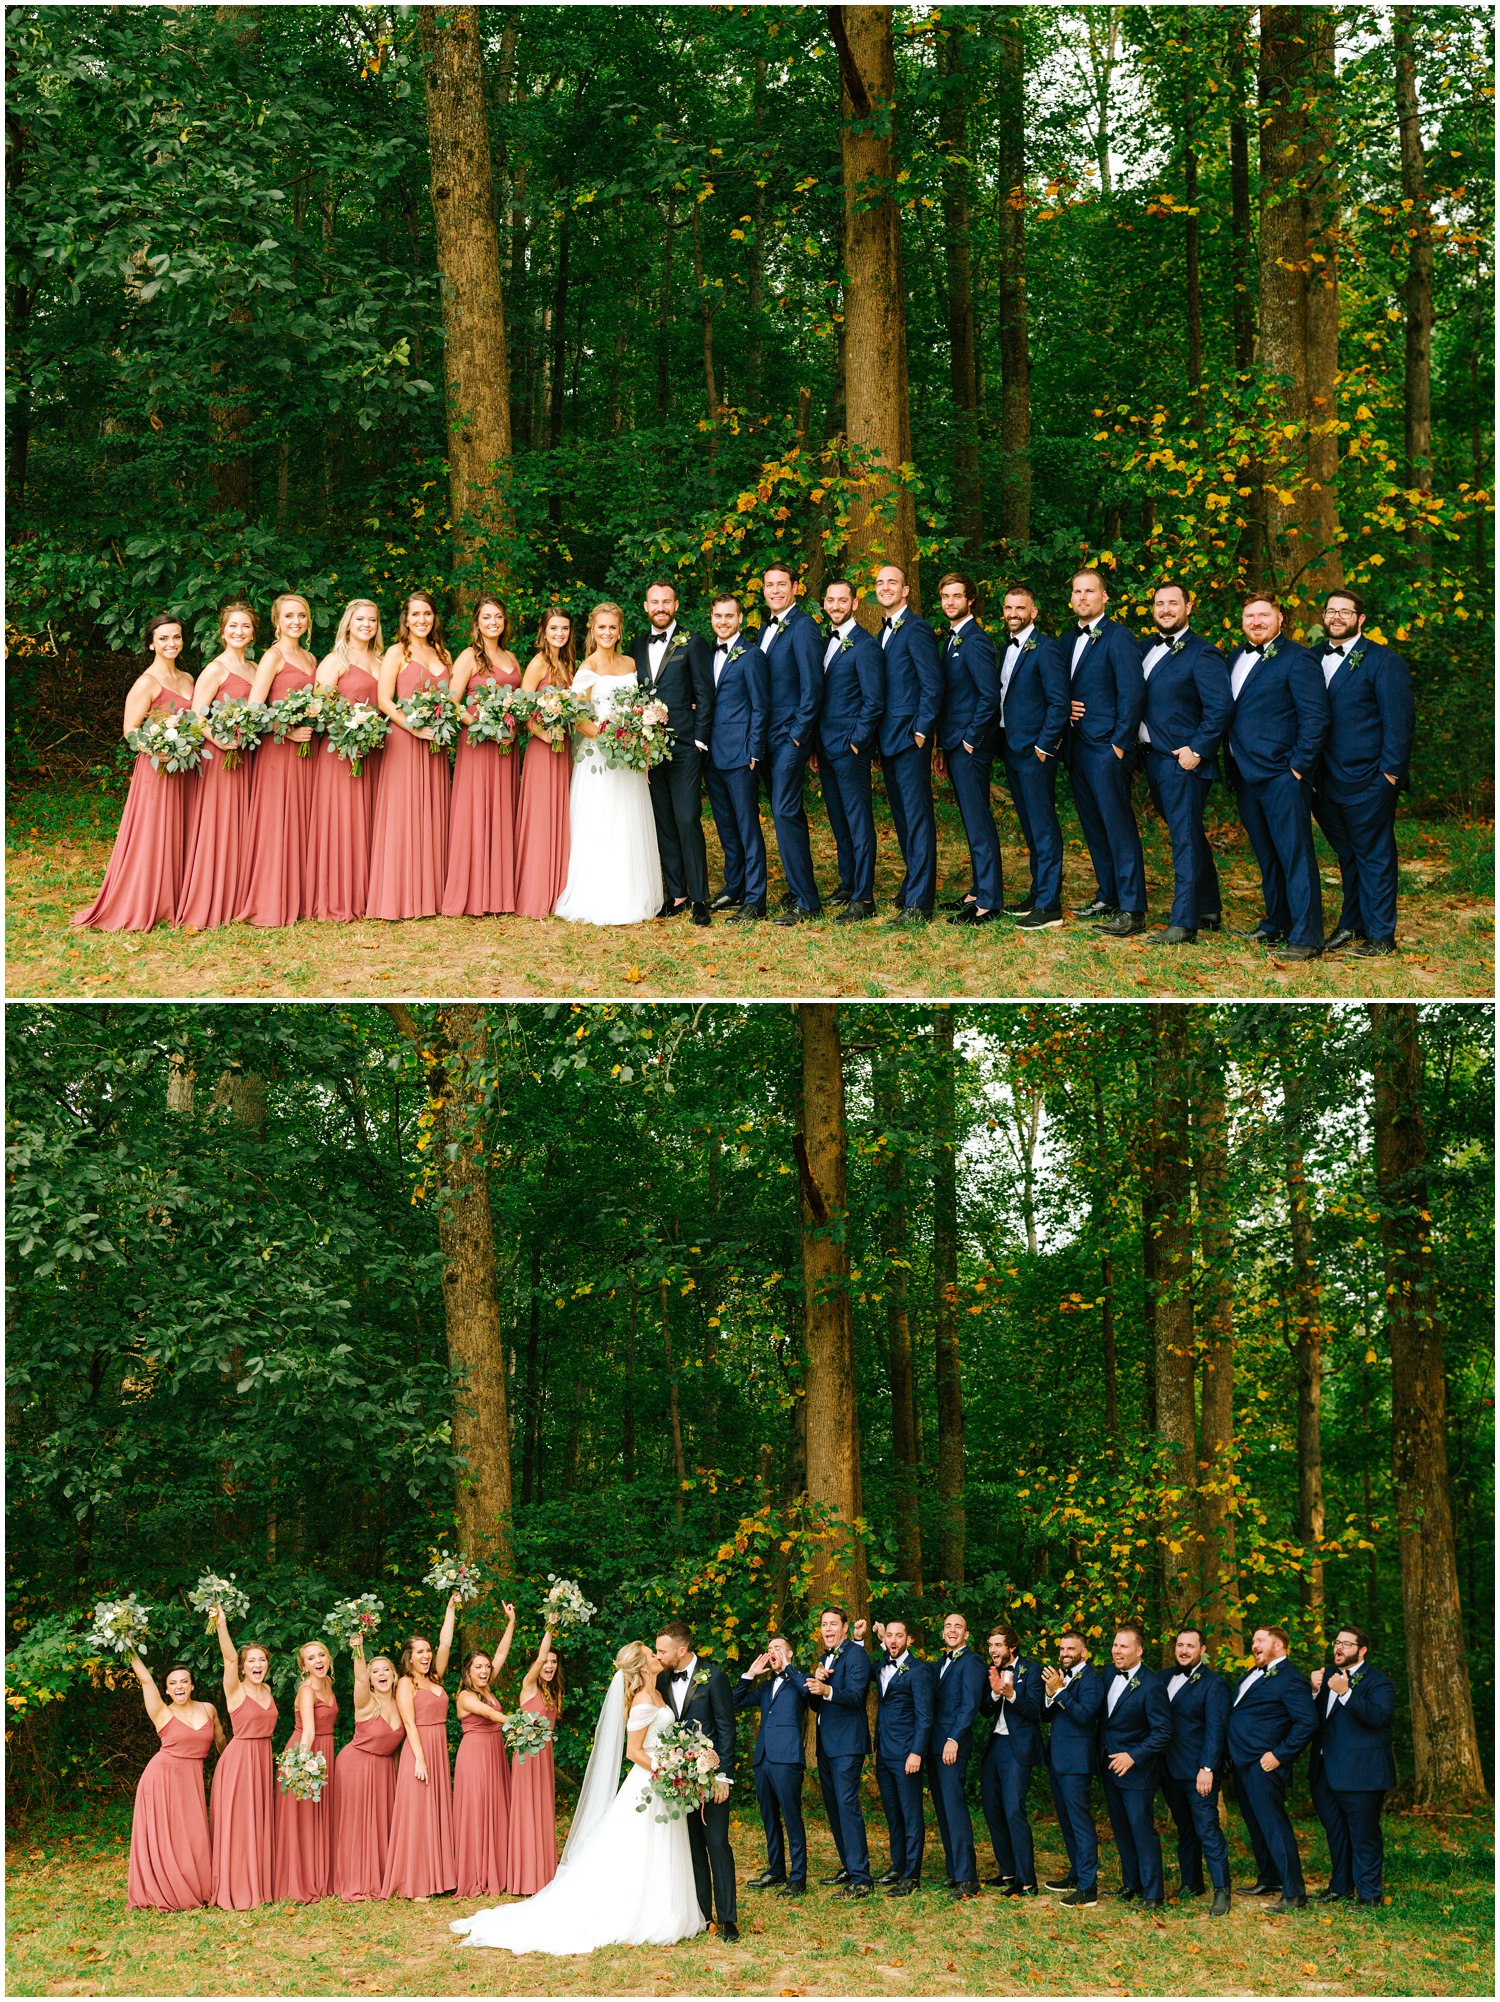 newlyweds with bridal party of 7 bridesmaids in coral gowns and 10 groomsmen in navy suits